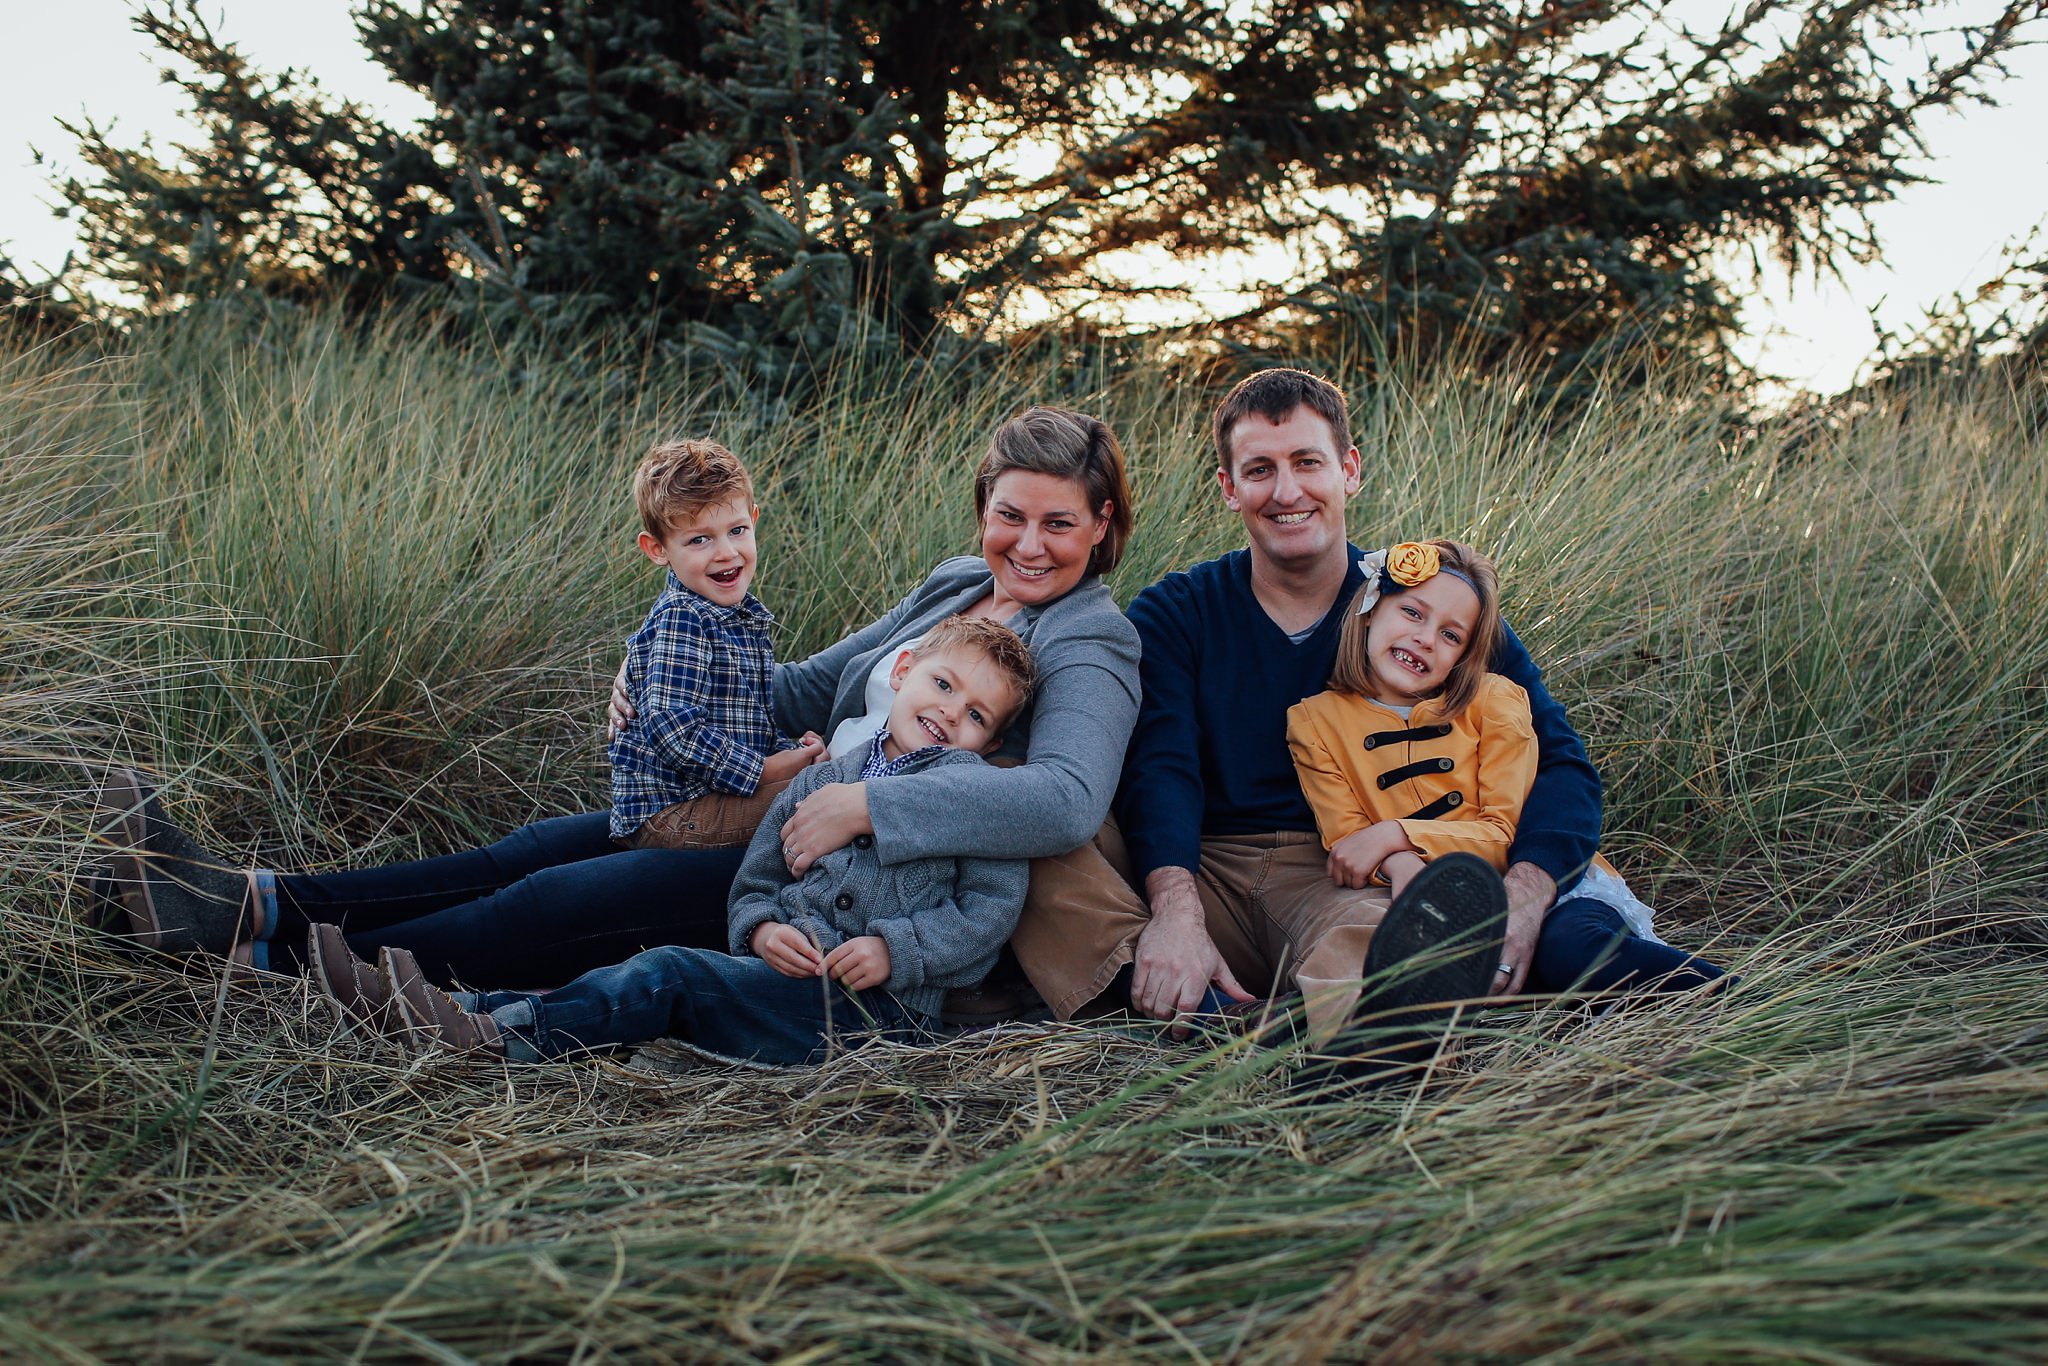 Whidbey-Island-Family-Photographer-Kara-Chappell-Photography_1177.jpg